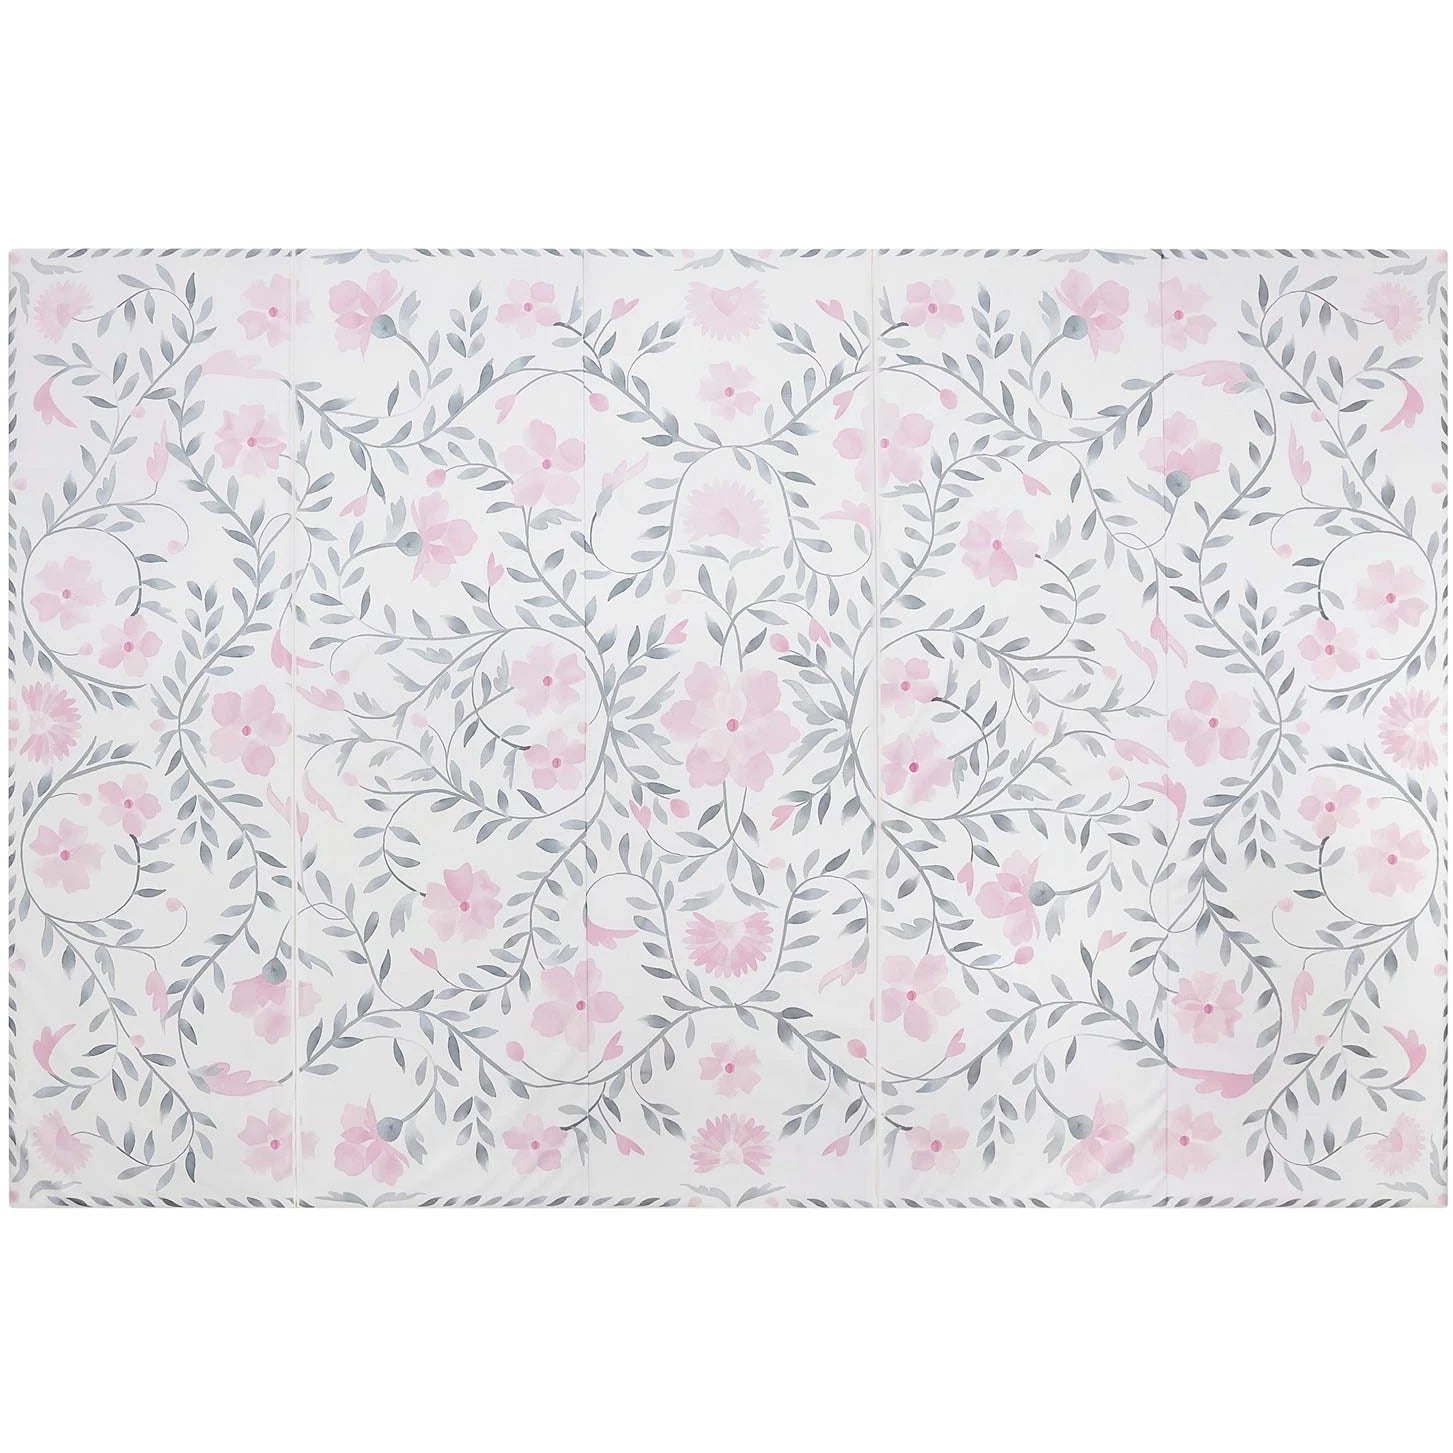 Overhead image of size 5x7.5 Faye Macaron gray and pink floral print tumbling mat